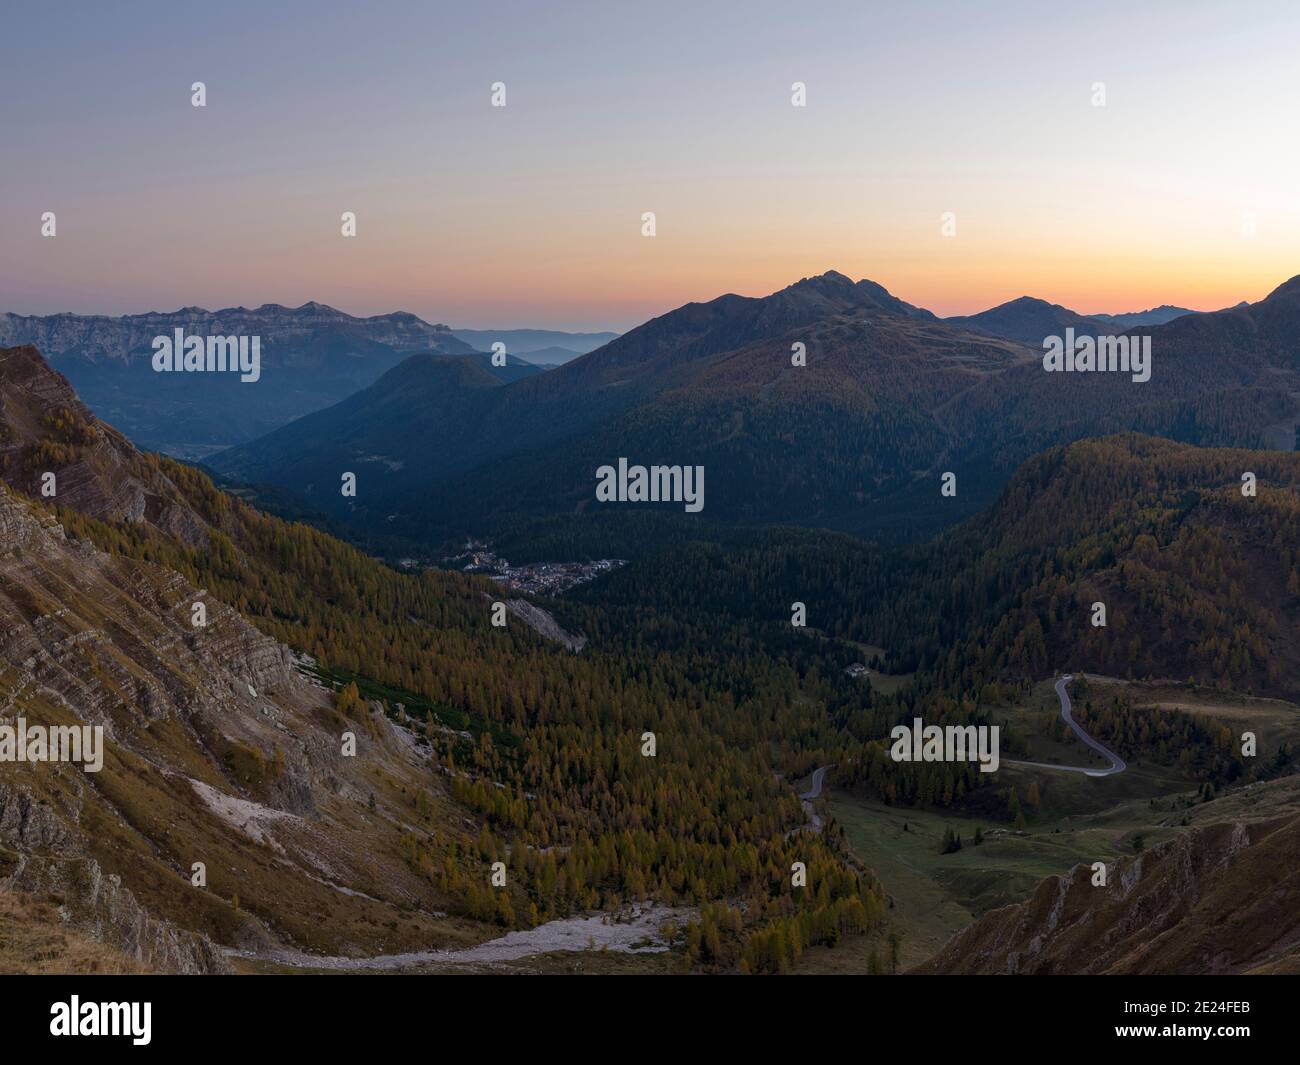 Val Cismon and San Martino di Castrozza during sunset.  Pala mountain range (Pale di San Martino) in the dolomites of Trentino. Pala is part of the UN Stock Photo